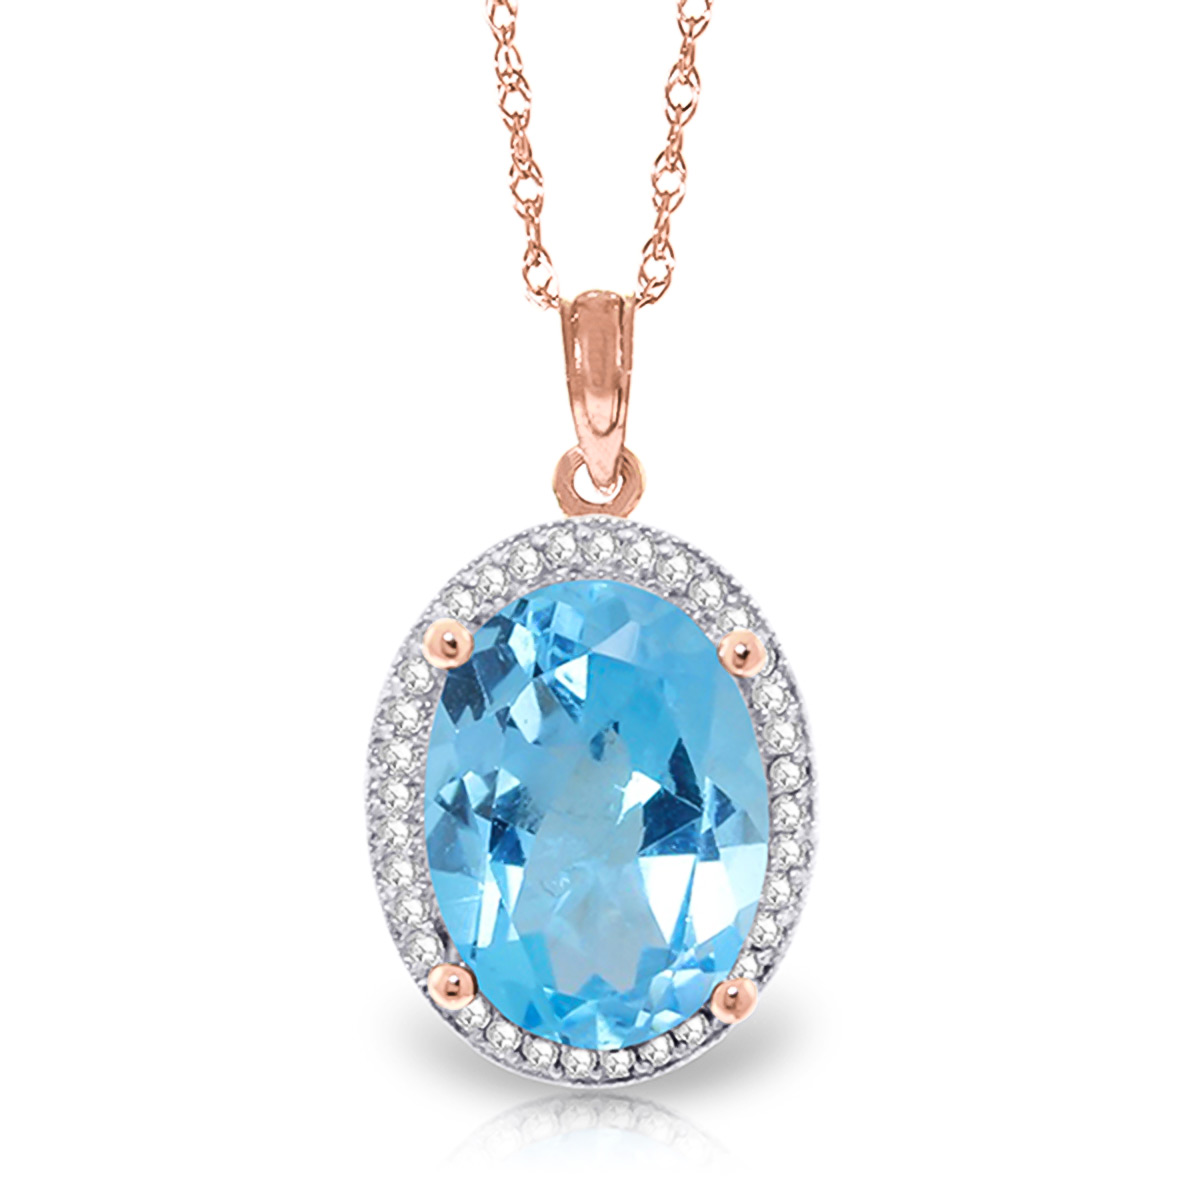 Blue Topaz Halo Pendant Necklace 7.58 ctw in 9ct Rose Gold